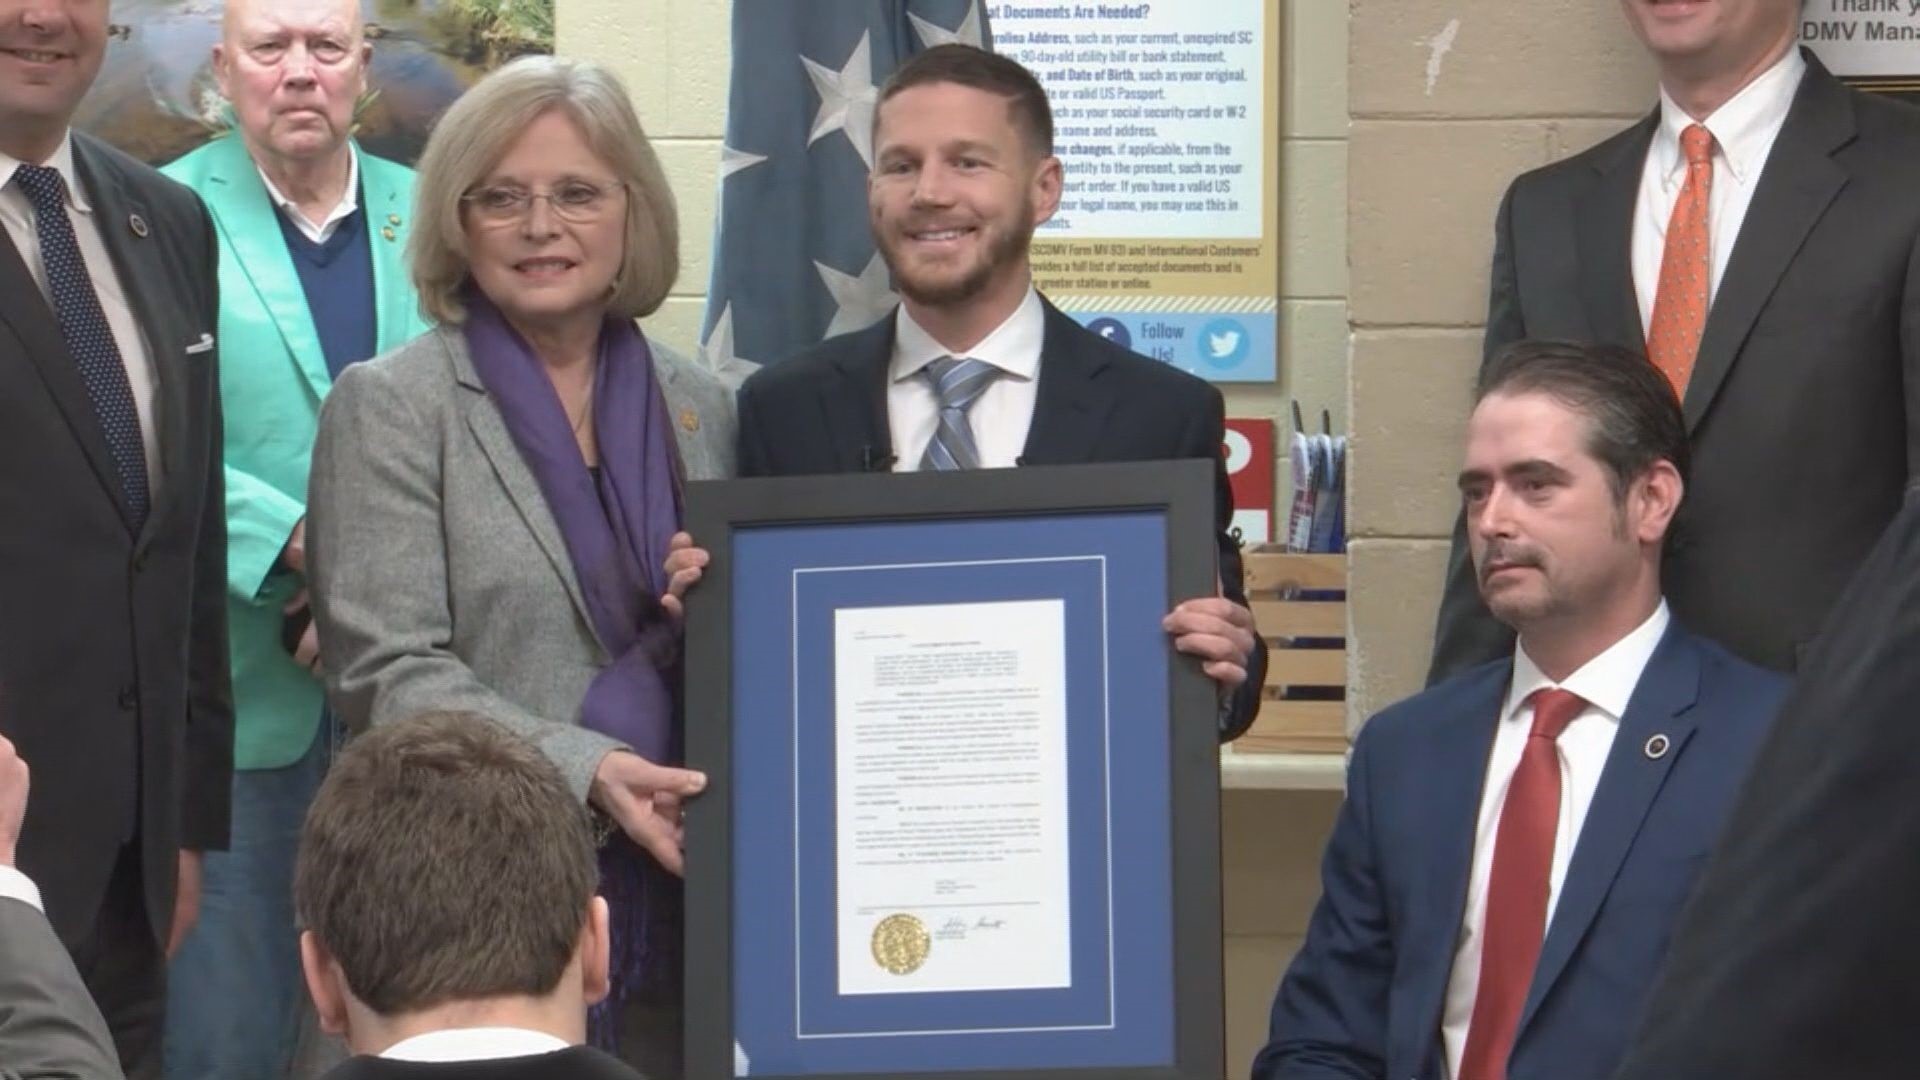 Kyle Carpenter, the retired Marine Lance Corporal was awarded the Medal of Honor, the nation's highest military honor, on June 19, 2014 by then President Barack Obama.